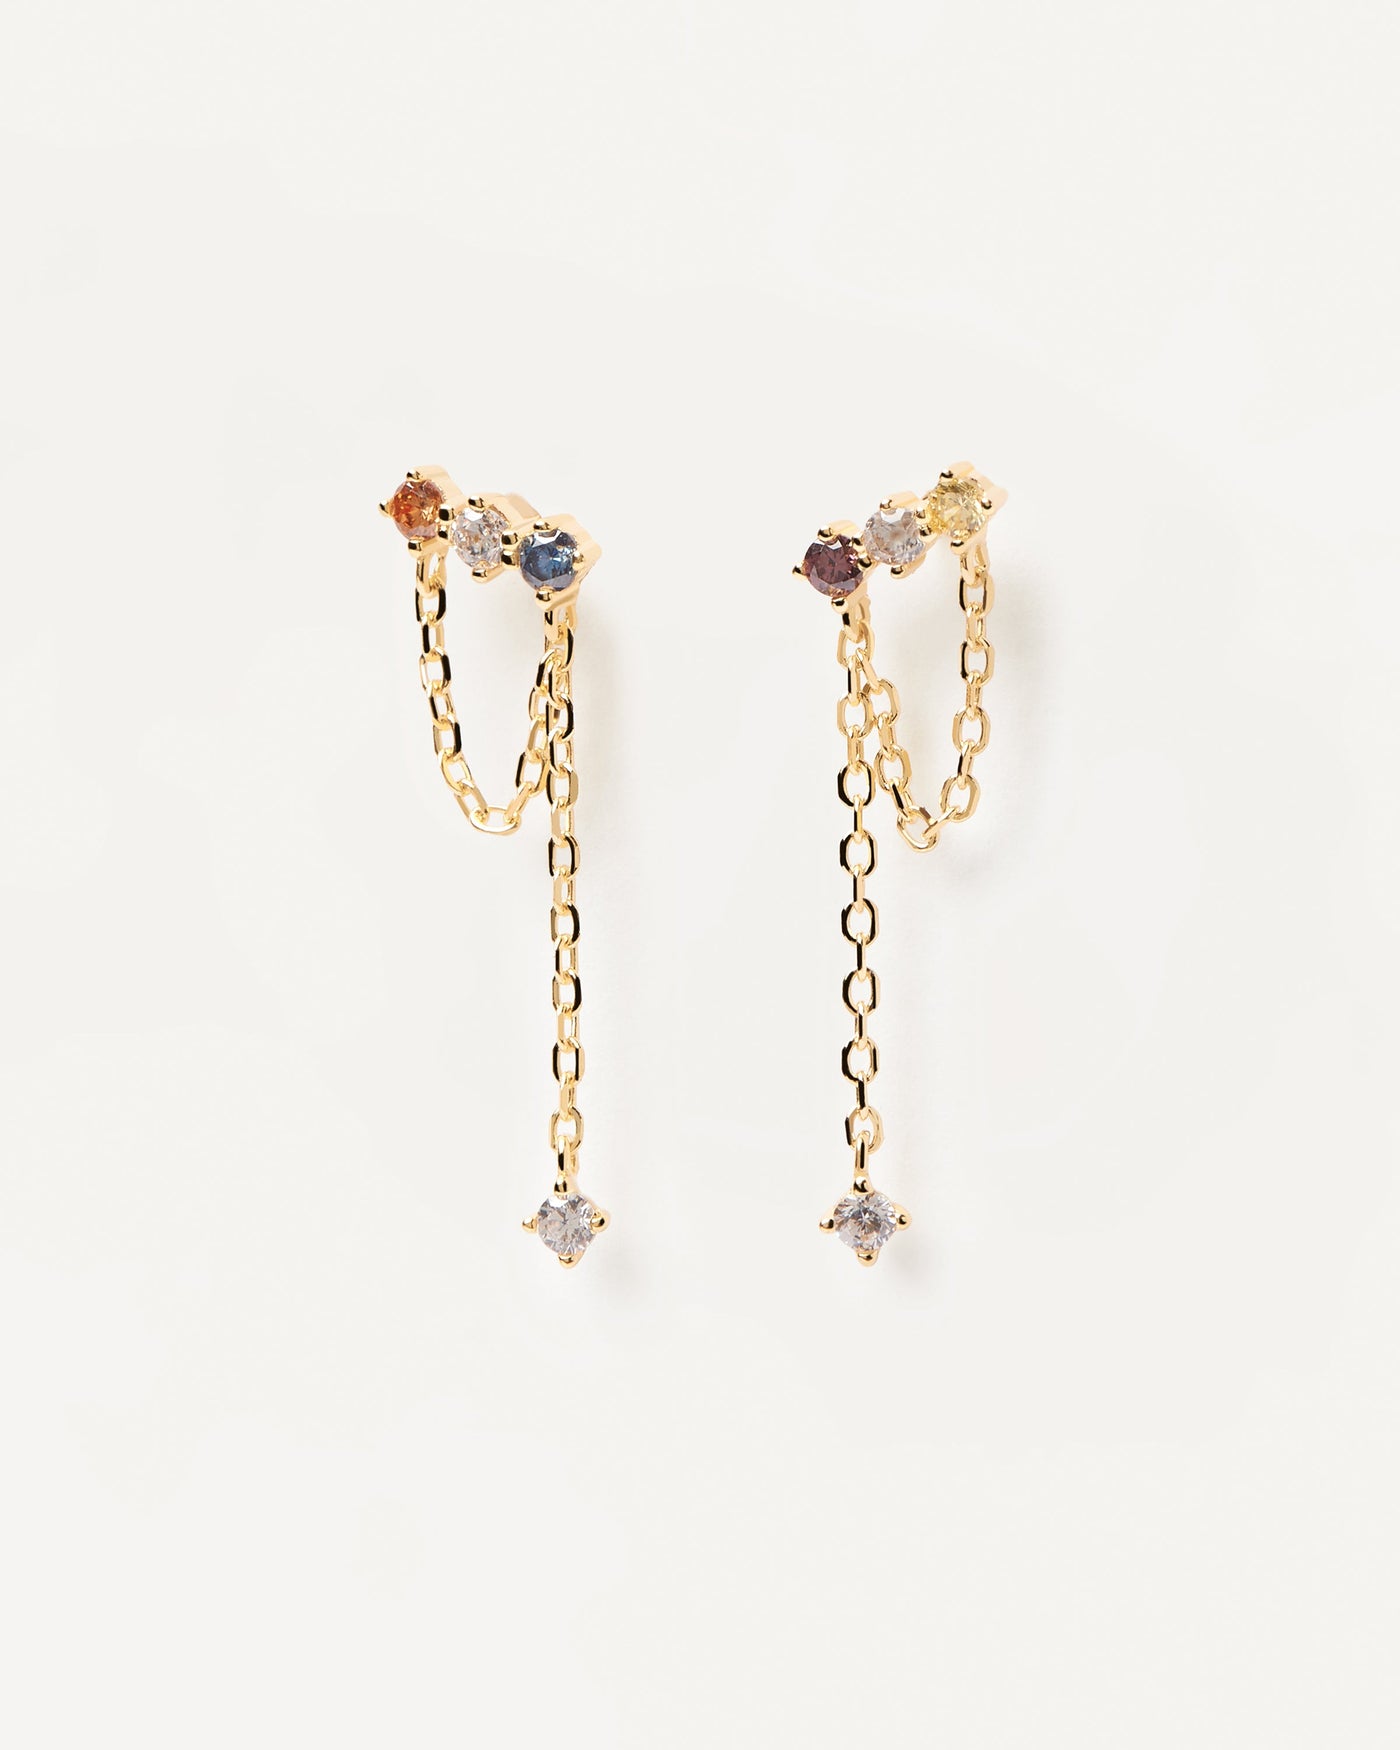 2023 Selection | Mana Earrings. Dainty chain earrings in gold-plated silver with five color stones. Get the latest arrival from PDPAOLA. Place your order safely and get this Best Seller. Free Shipping.